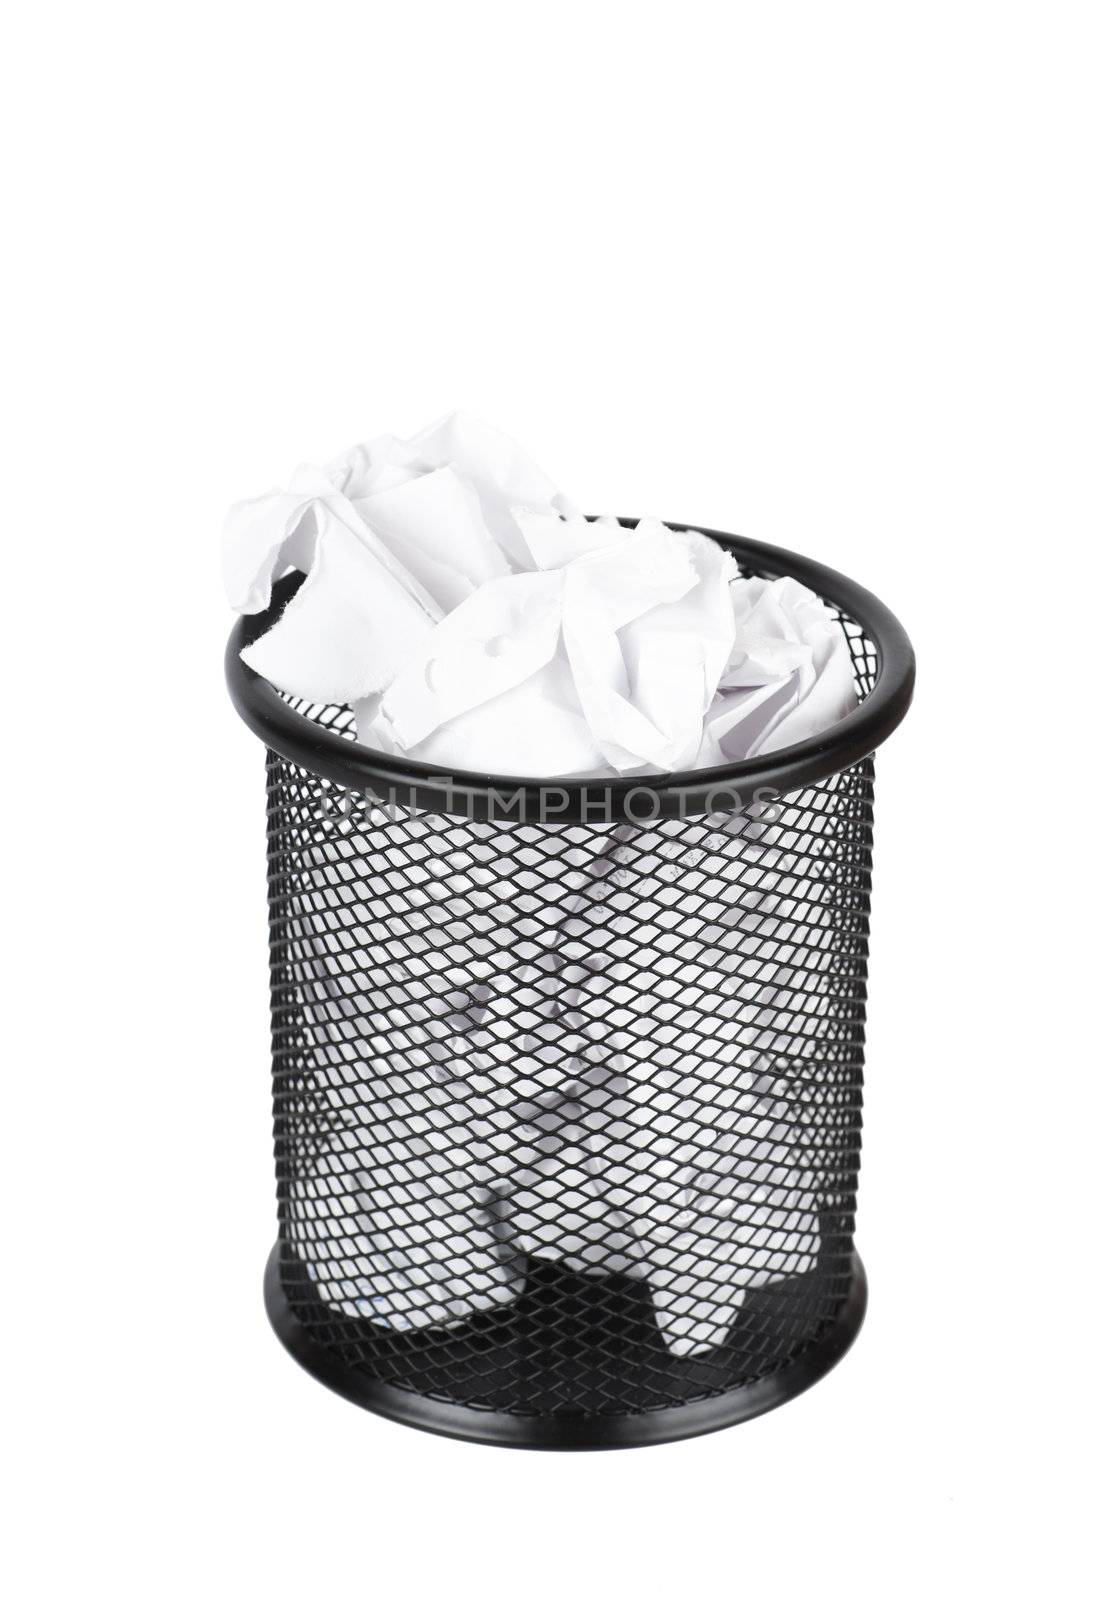 Trash can filled with crumbled paper isolated on white background